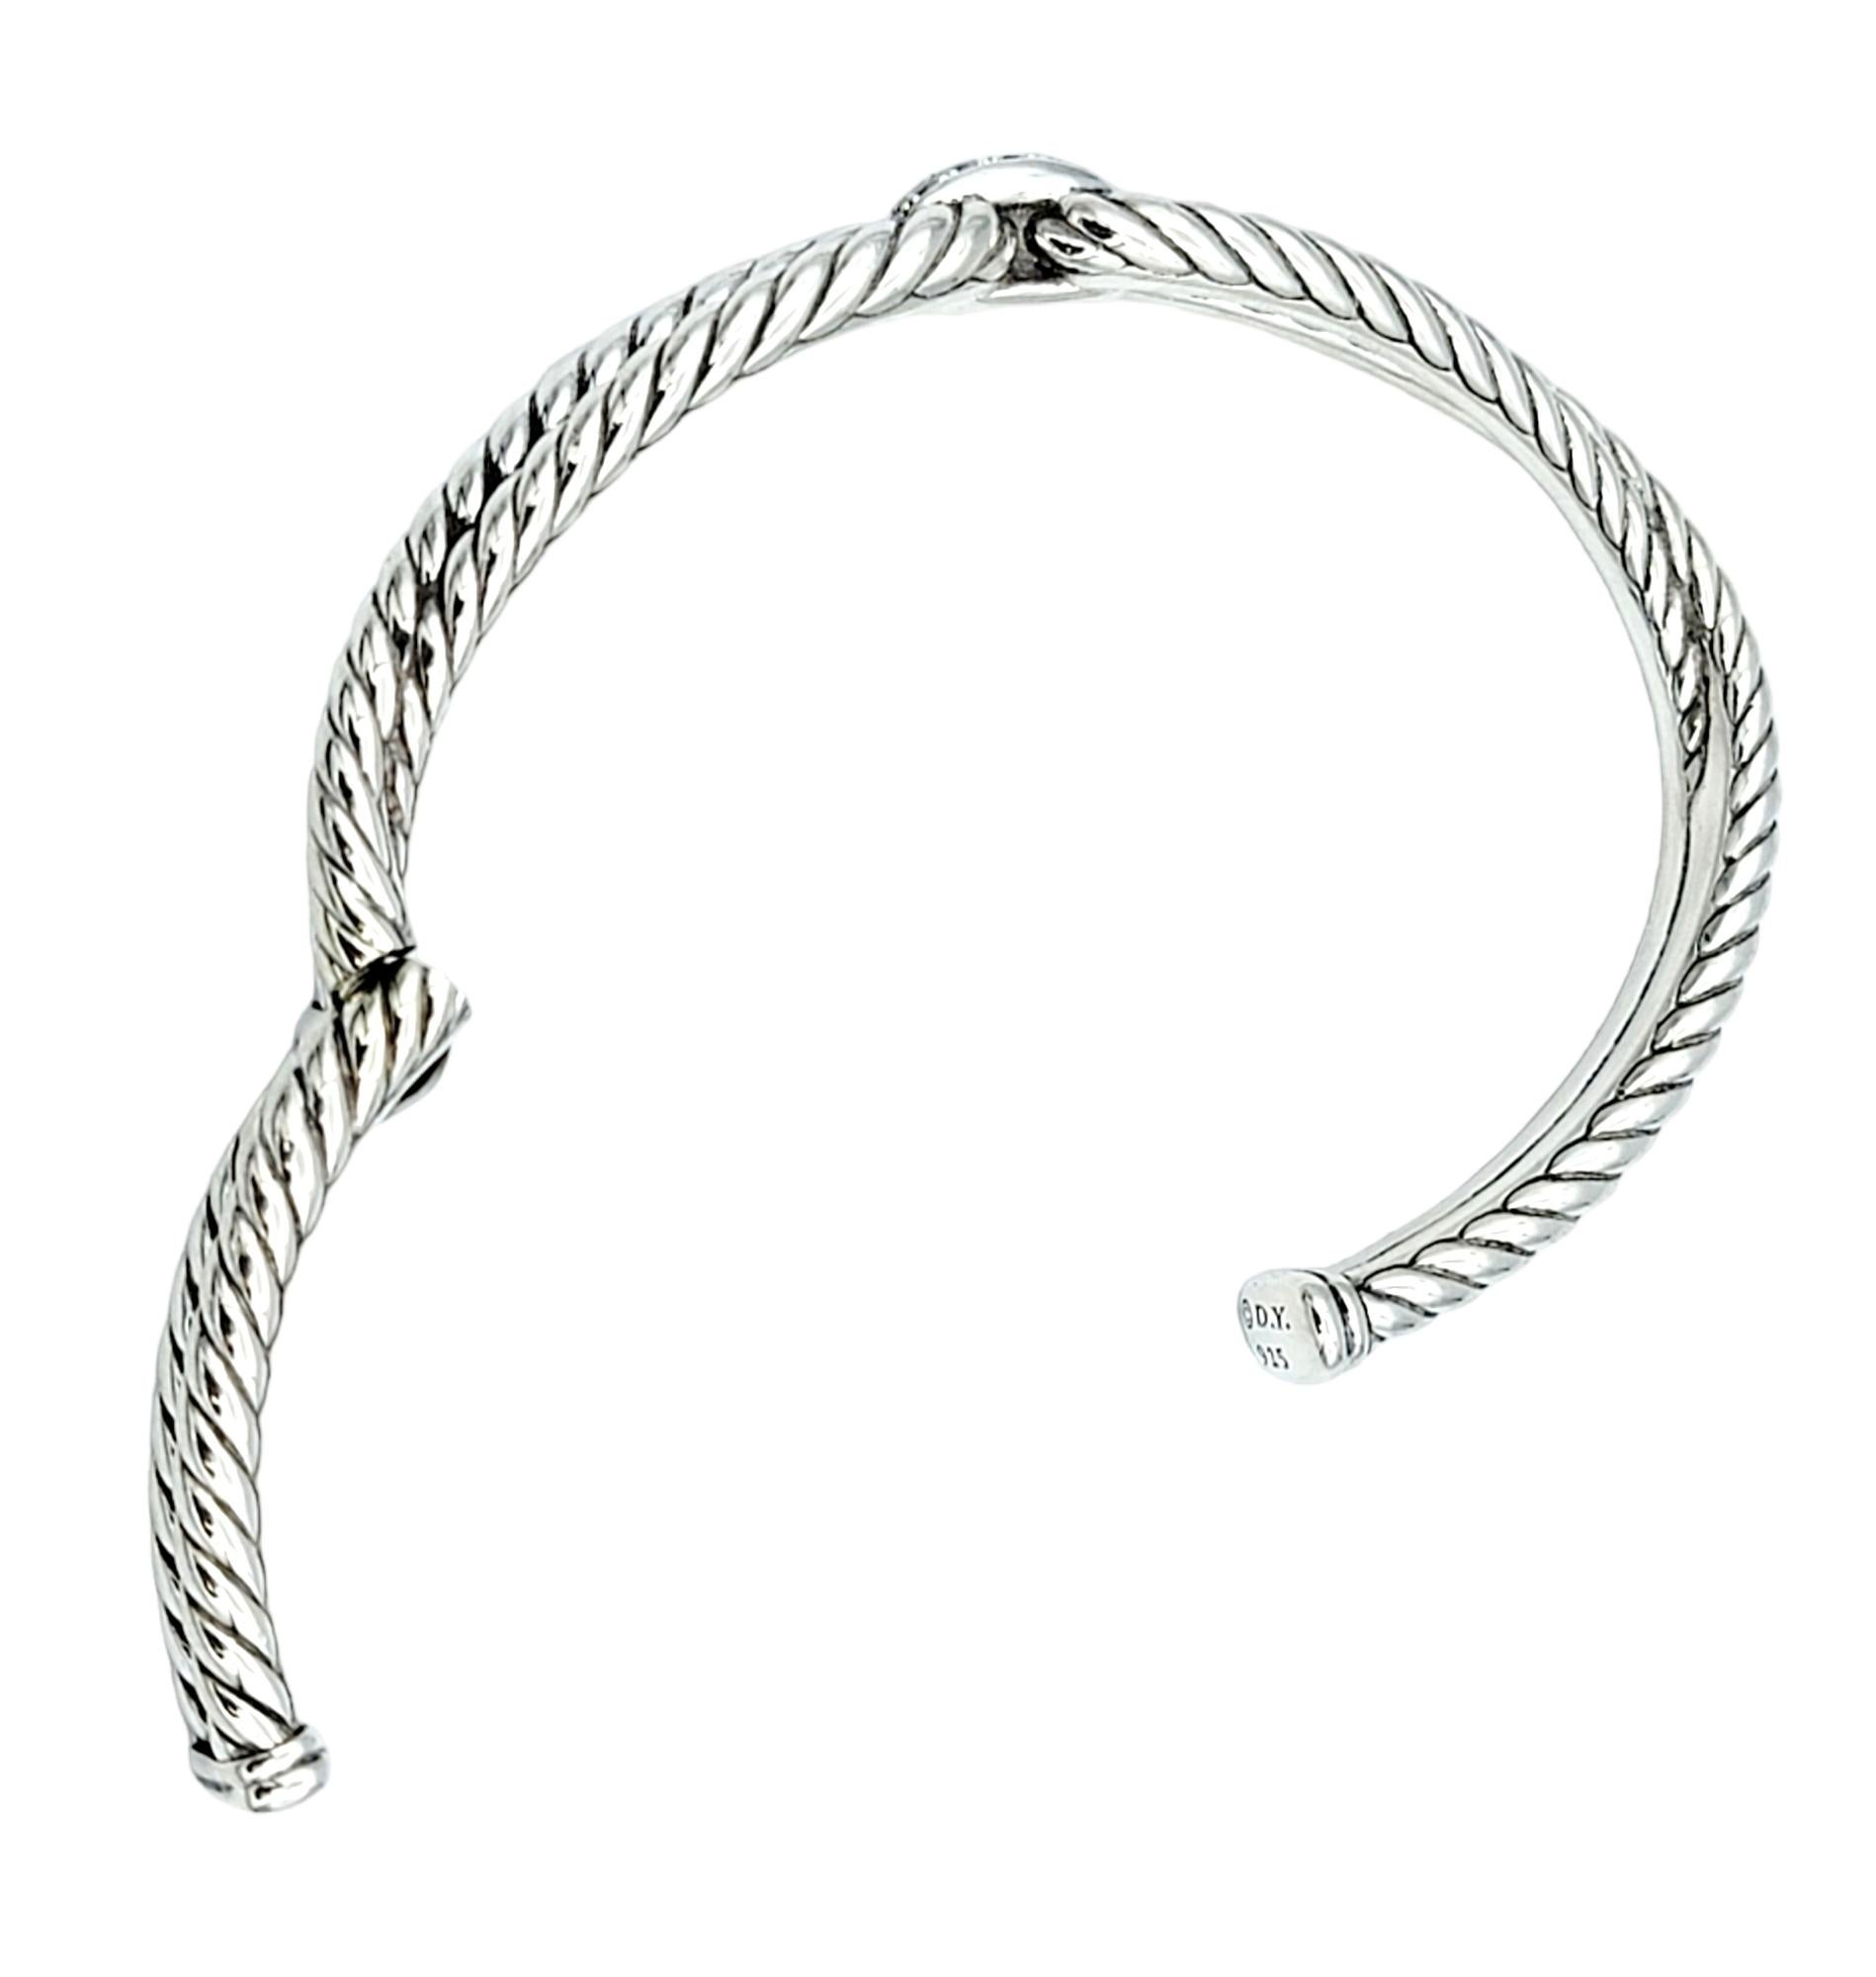 Contemporary David Yurman Polished Sterling Silver Cable Loop Cuff Bracelet with Diamonds For Sale